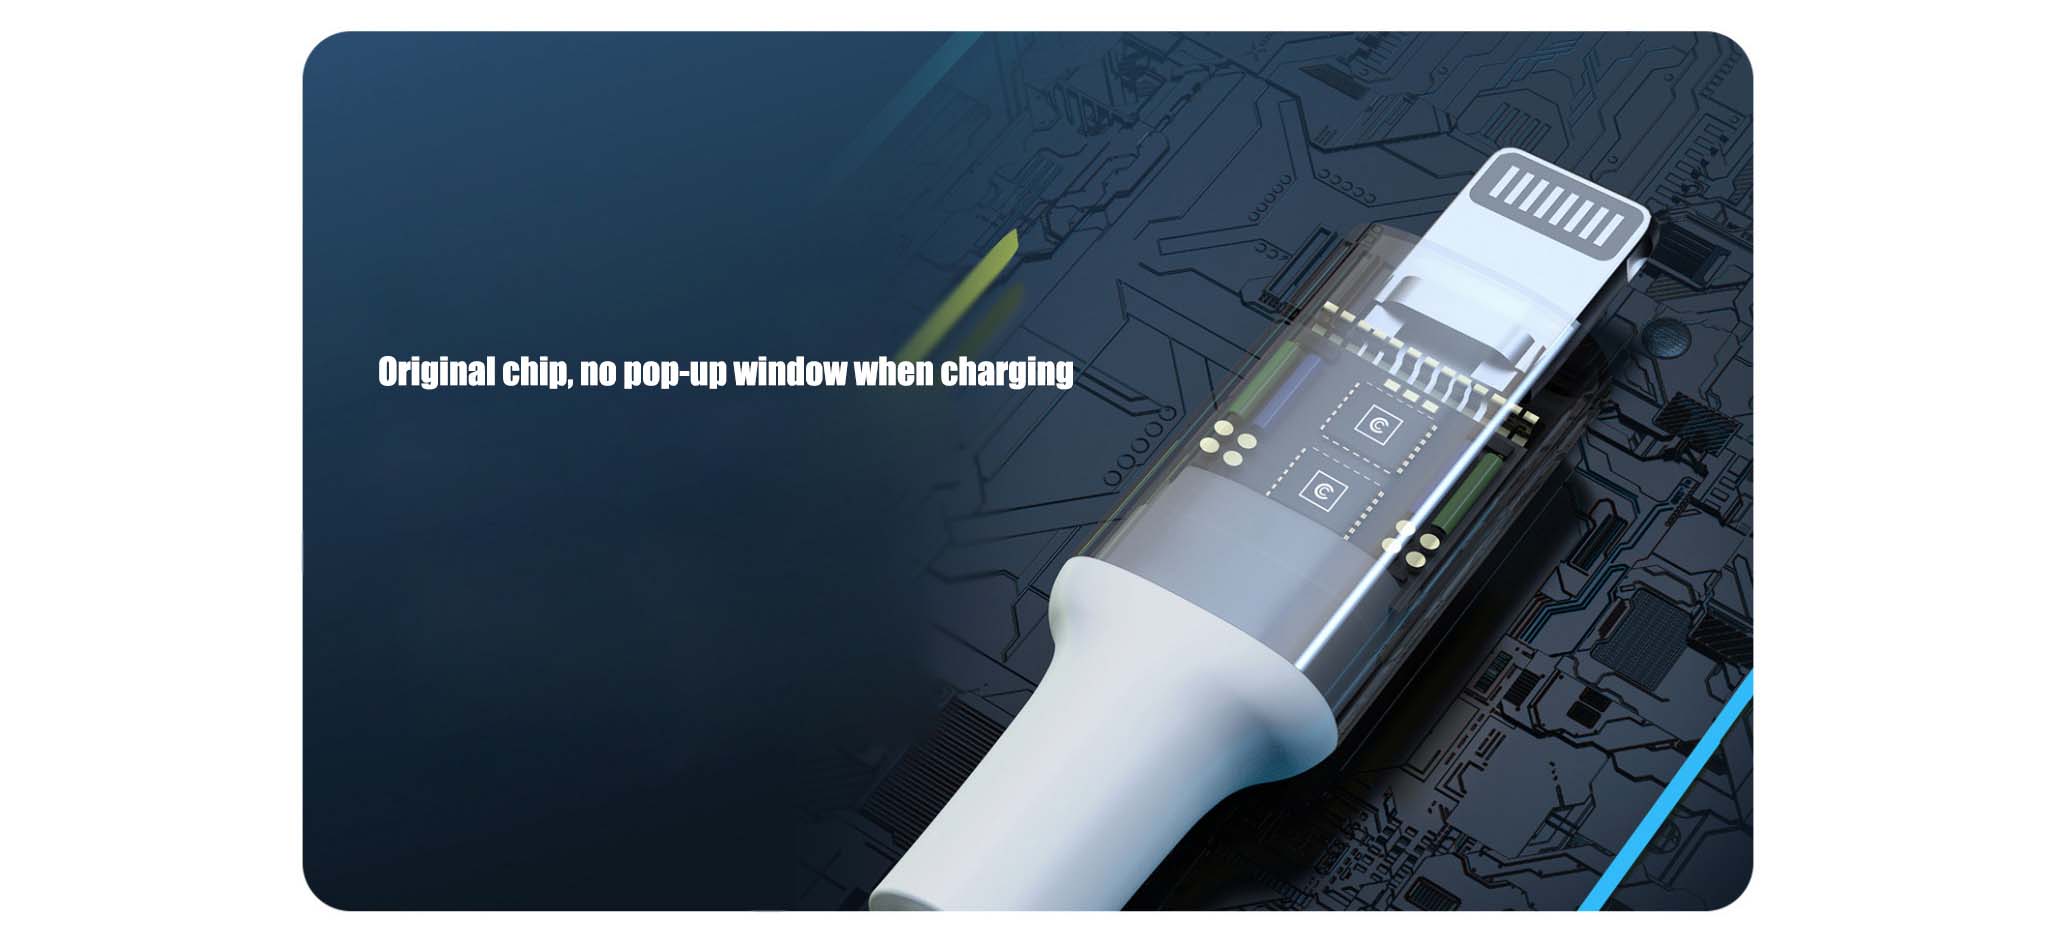 Nubia C to L MFi PD Fast Charging Data Cable